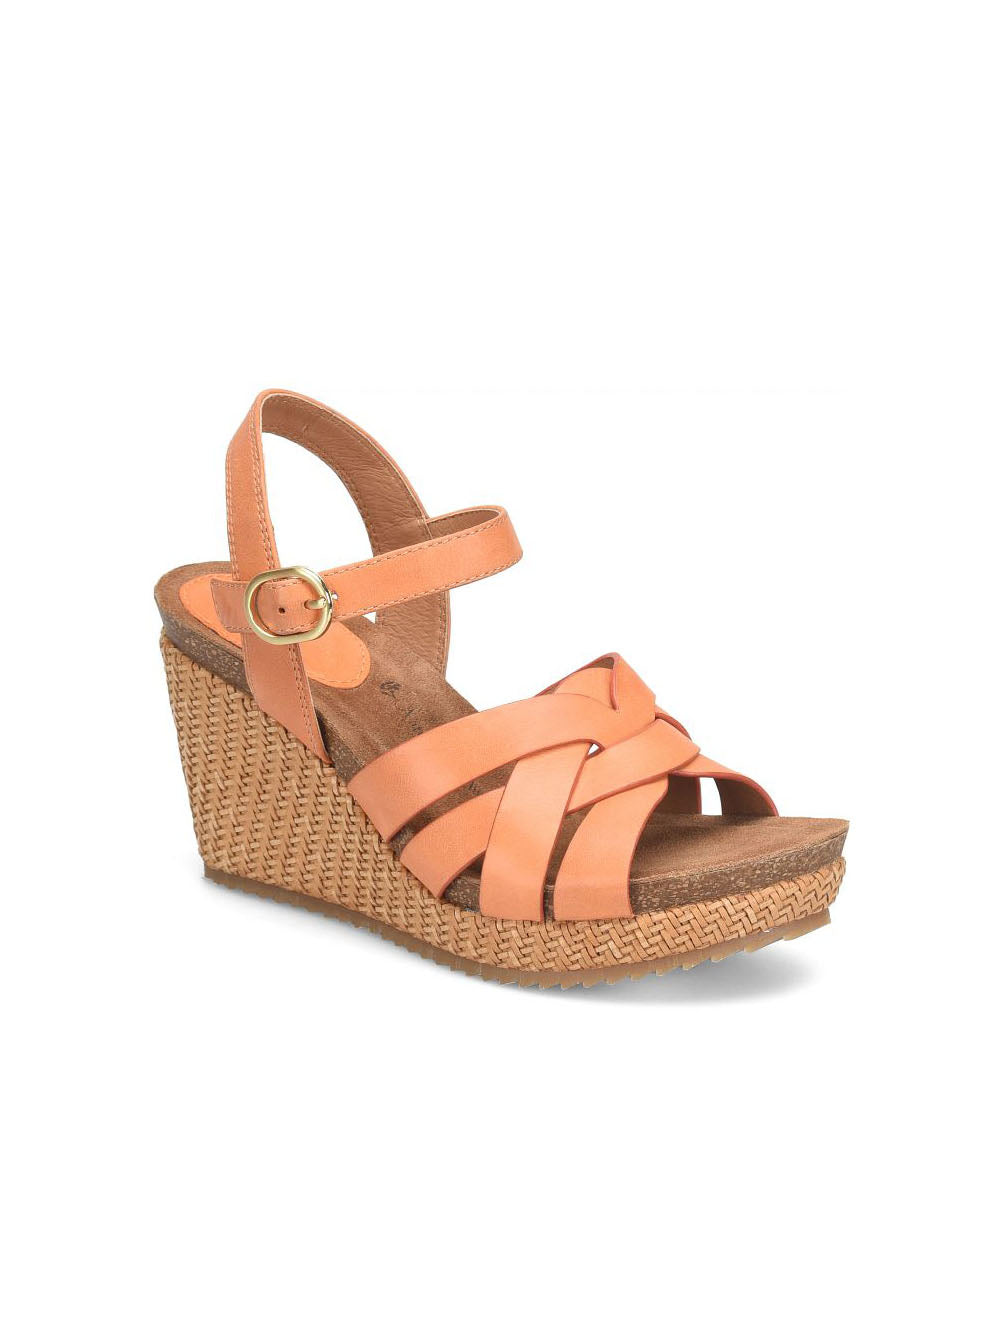 sofft shoes carlana woven wedge sandal in sunset orange